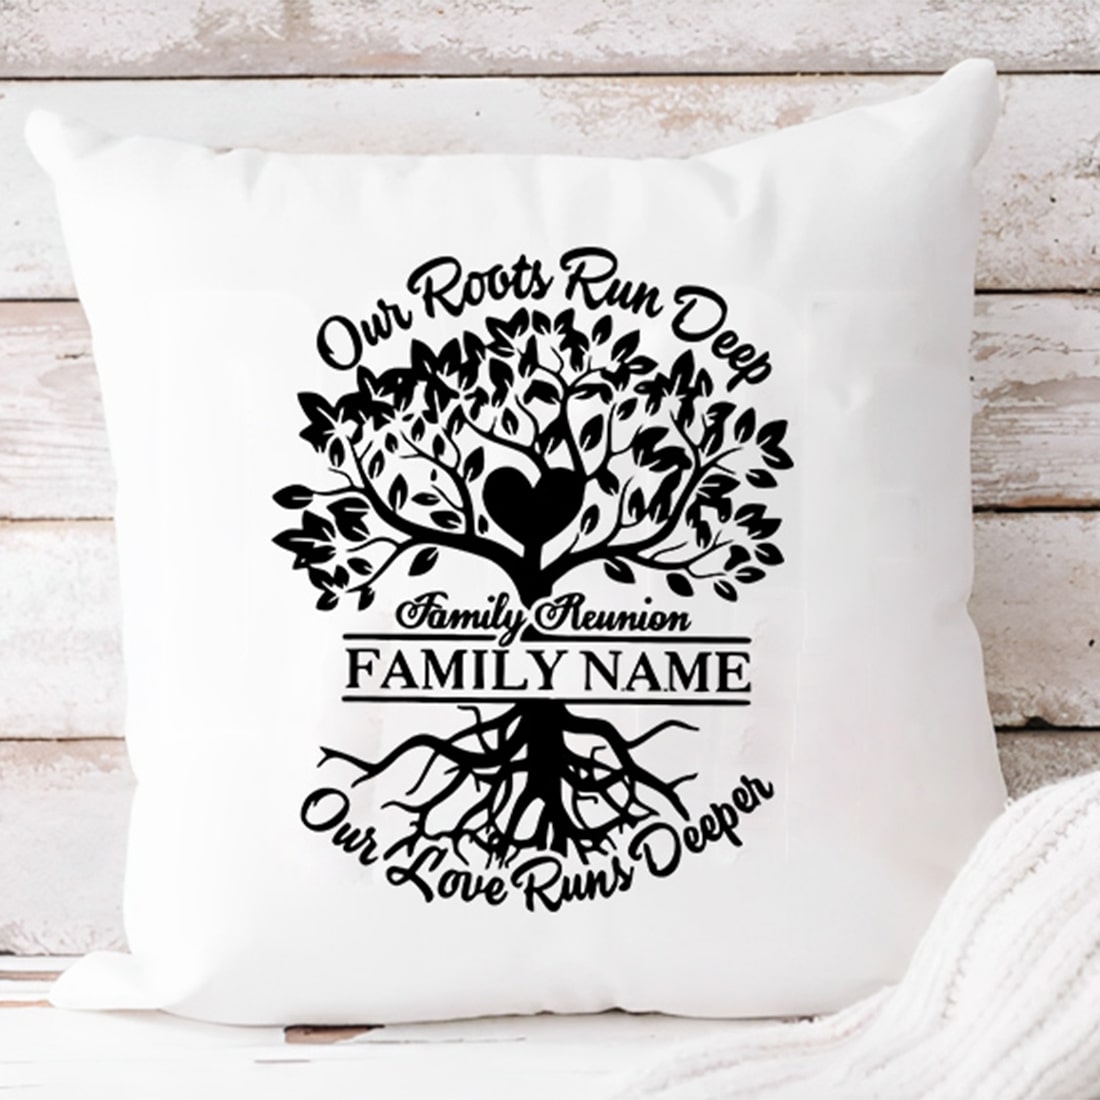 Family Reunion Svg Png| We've Shaken the Family Tree The Nuts are Gathering| DIY Personalized Family Name| Funny 2023 Family Matching Gifts preview image.